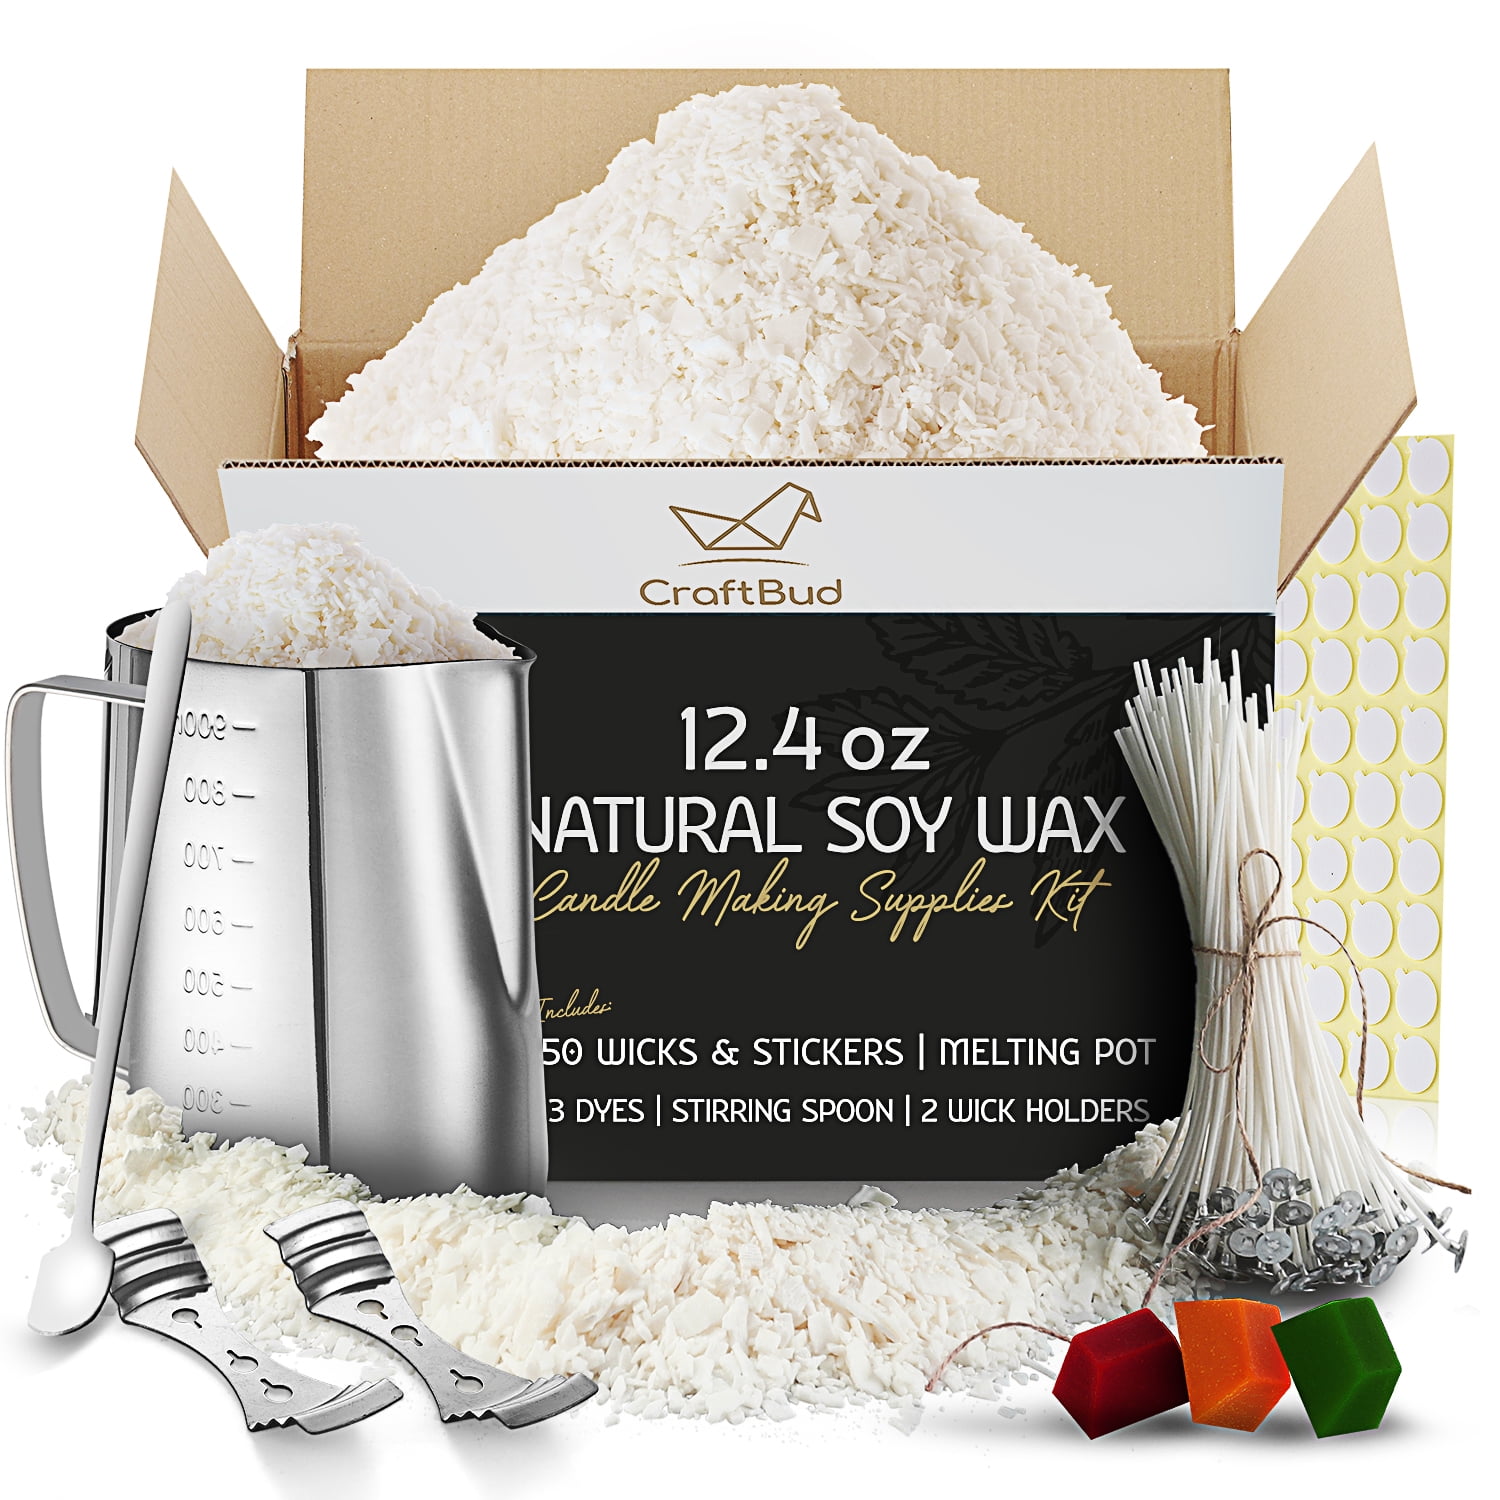 Craftbud Candle Making Kit - Candle Wax for Candle Making, 12.4oz Natural  Soy Wax, 900ml Stainless Steel Pot, Cotton Wicks, Wick Stickers, Dye  Blocks